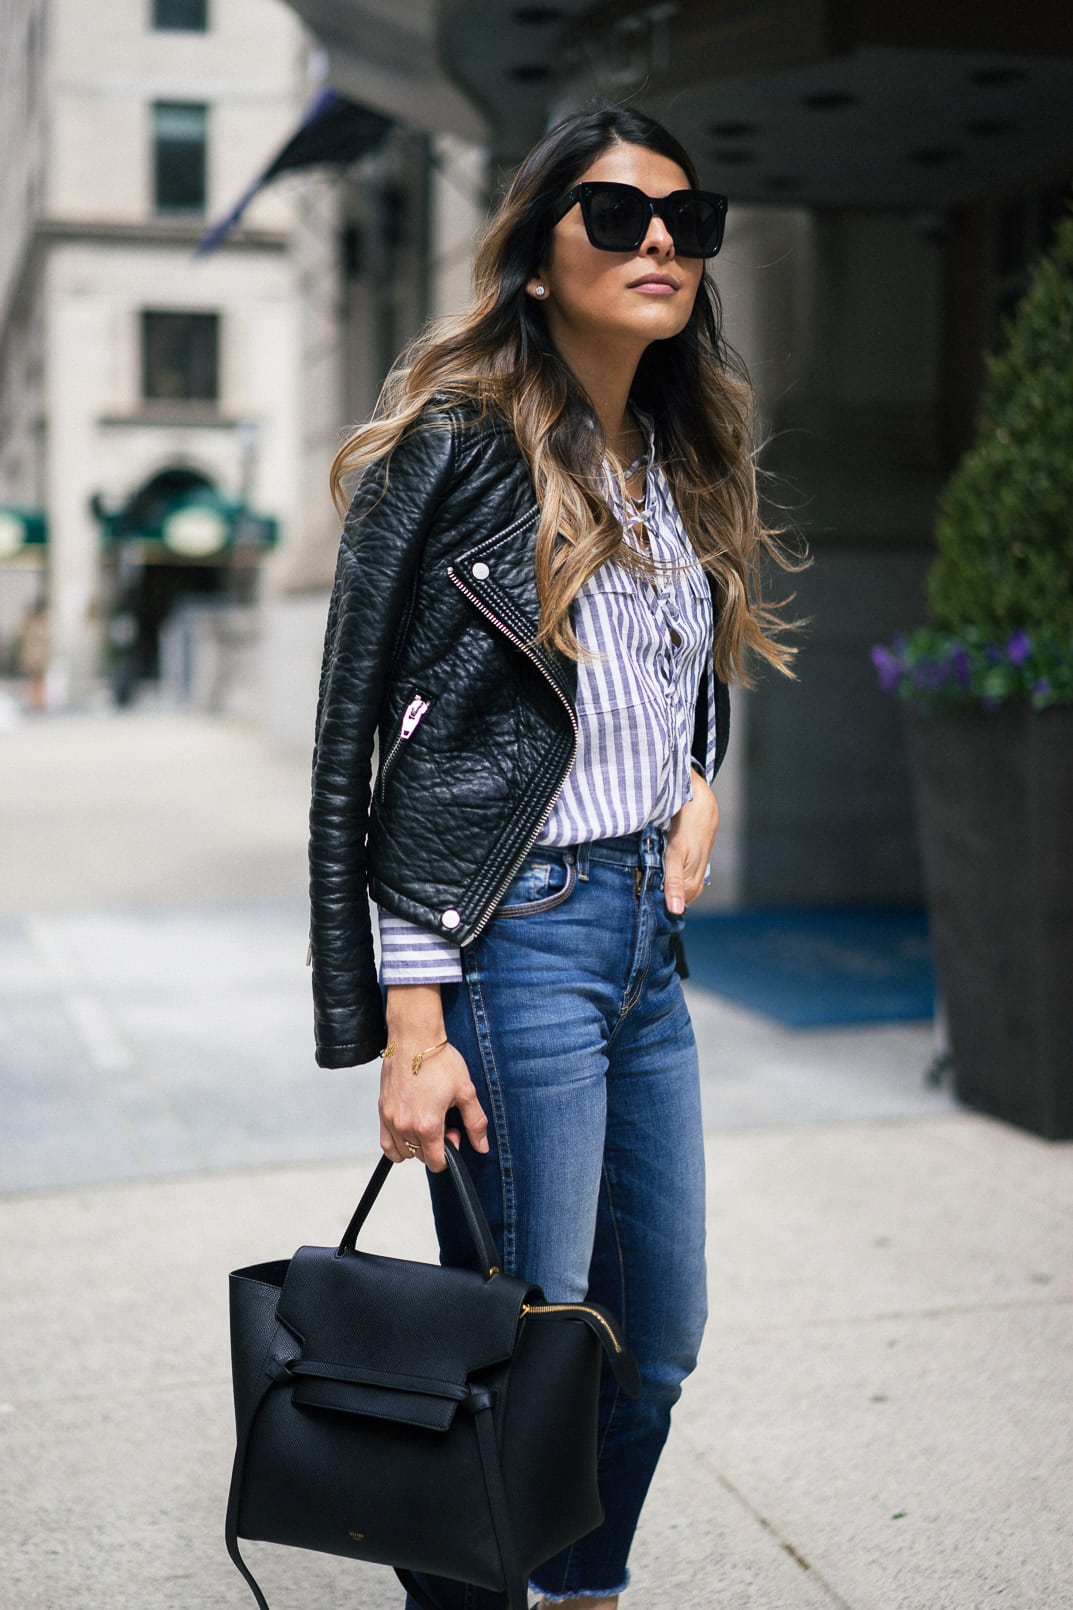 7fam ankle skinny jeans, black pumps, leather jacket, lace-up shirt, back to basics, casual look